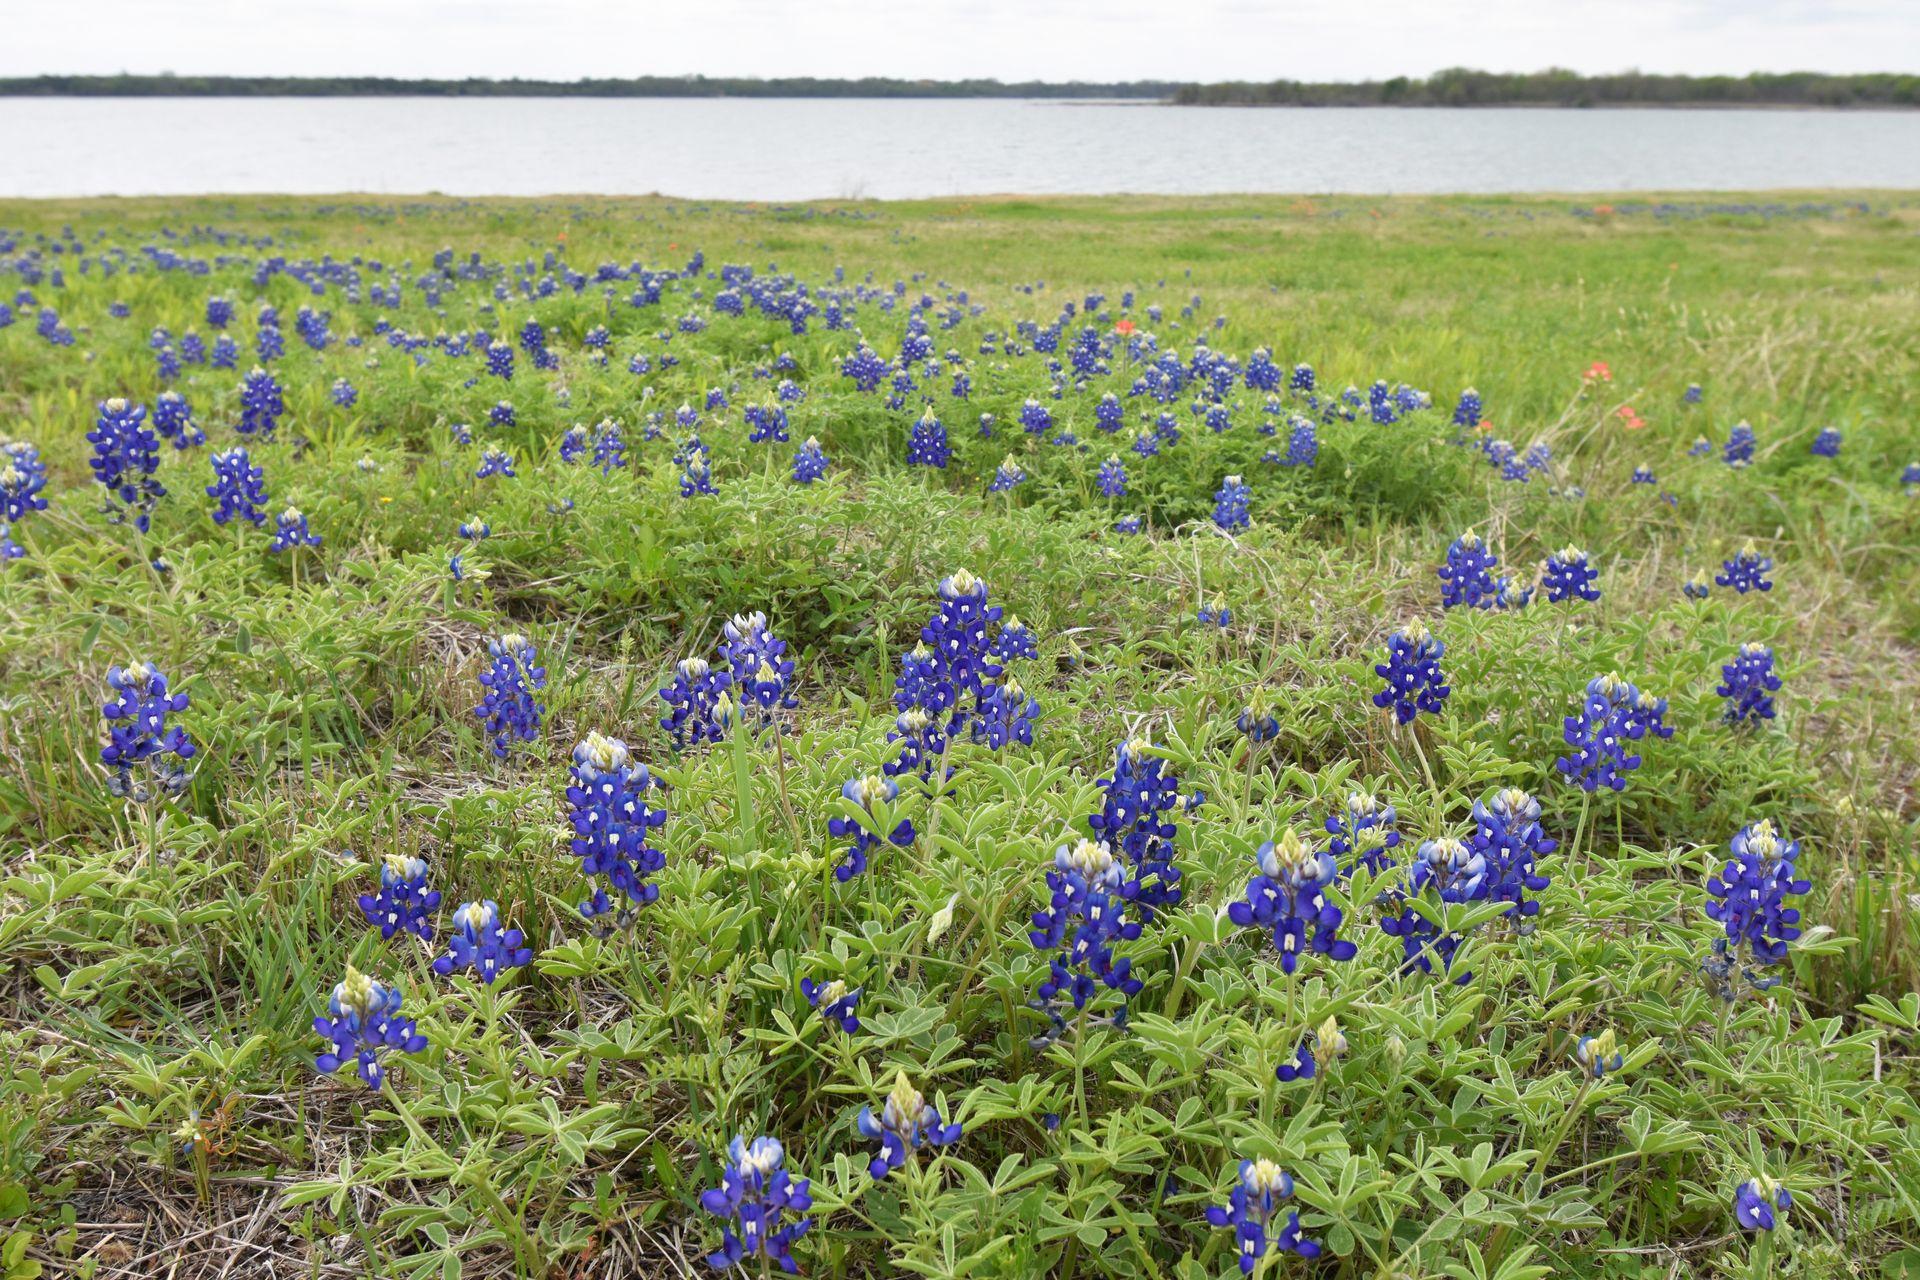 A view of a field of bluebonnets with water in the distance.